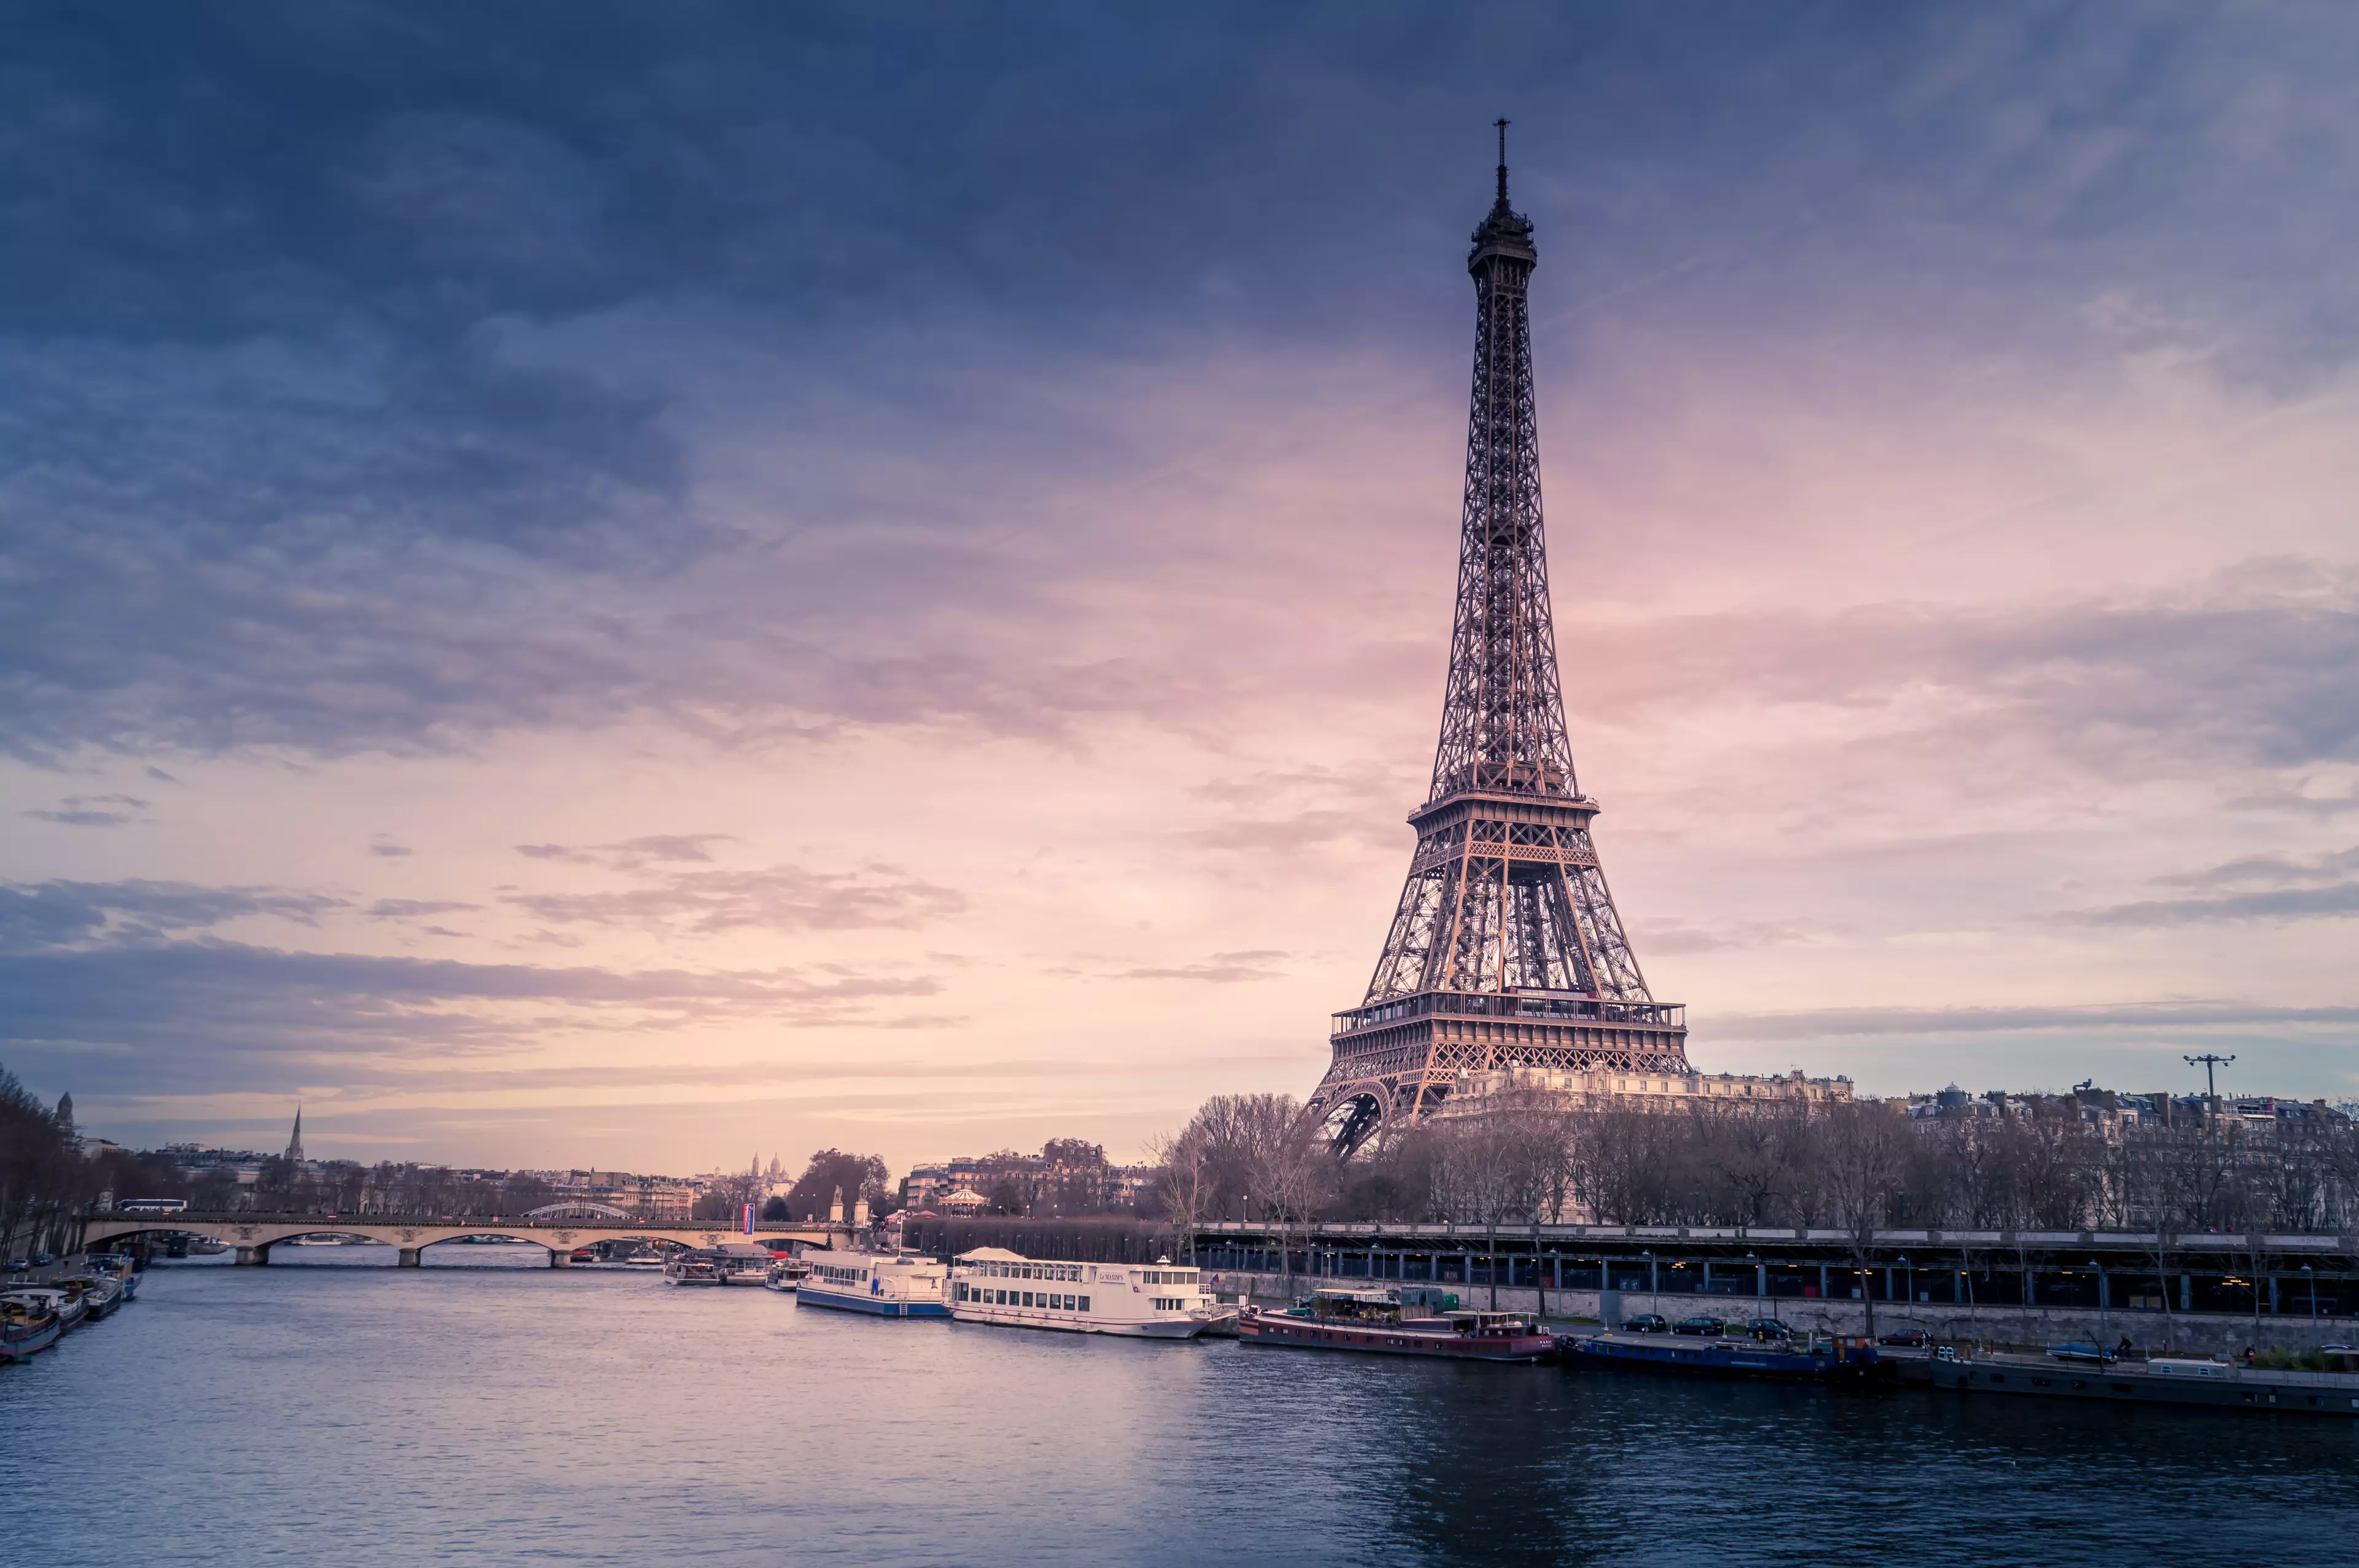 Tourists spent 402 hours writing bad reviews about the Eiffel Tower (